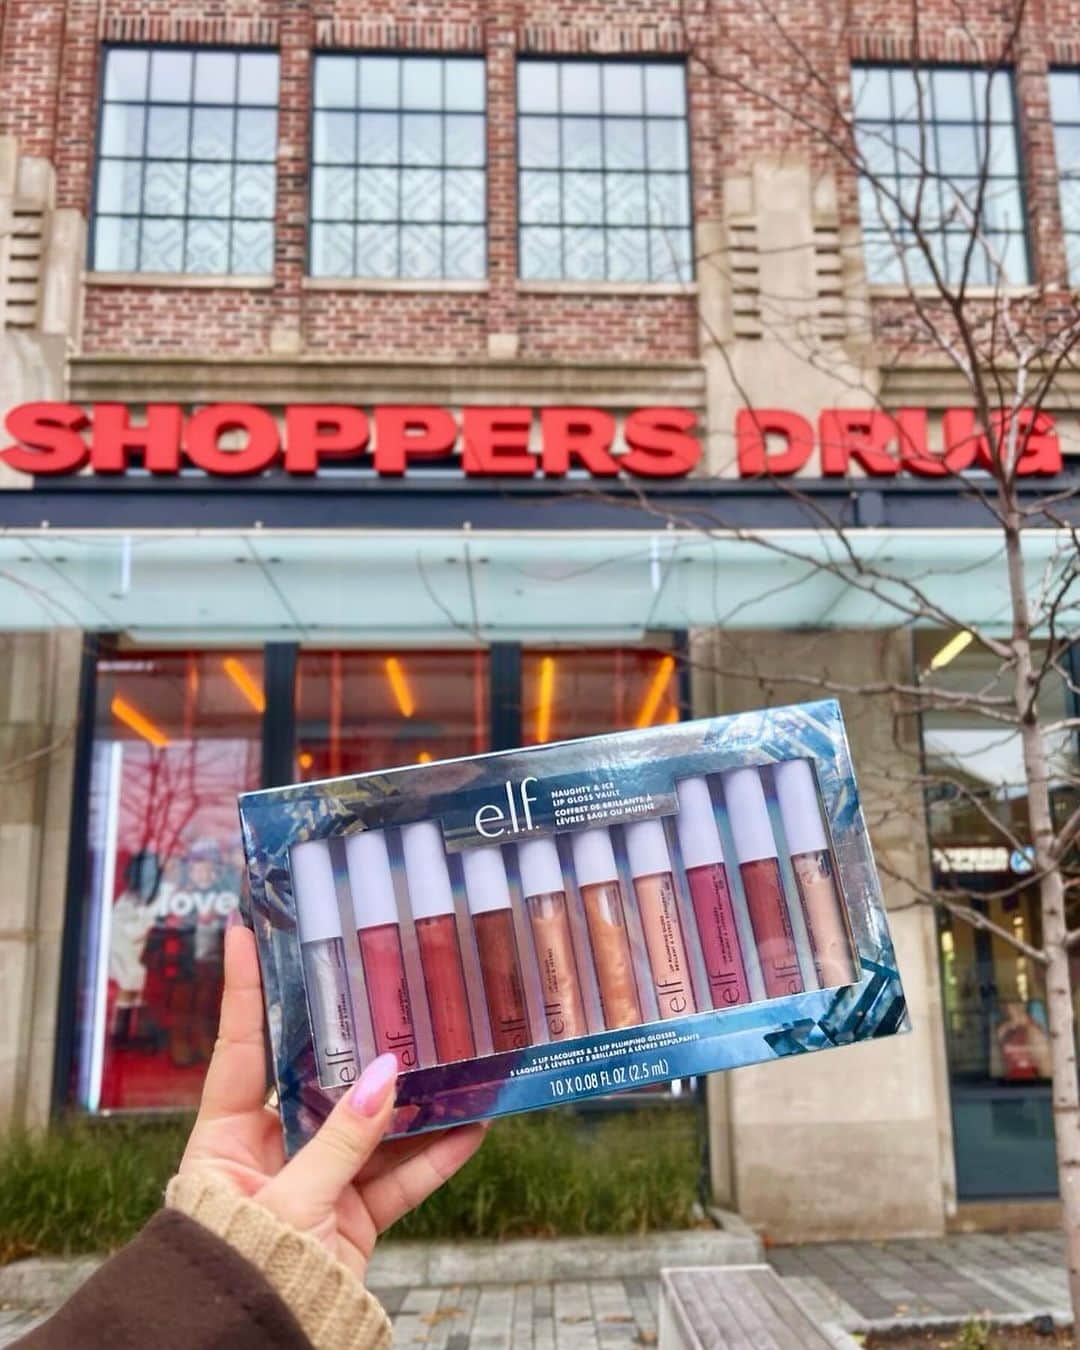 e.l.f.のインスタグラム：「Hey Canada! 🇨🇦 Our limited-edition holiday kits are NOW AVAILABLE in-store AND online exclusively at @shoppersbeauty 🥳  Featured:  ❄️ Naughty & Ice Lip Gloss Vault ($40) ❄️ Embellished 9-Piece Brush Set ($20) ❄️ Snow Globe Blend & Brush Gift Set ($15) ❄️ Sponge On, Sponge Off Kit ($18) ❄️ The All Day, Every Day Kit ($20) ❄️ Under The Mistletoe Moisturizing Kit ($16)  SHOP NOW and share the e.l.f. love this holiday season! 😍 Available online & in-stores at @shoppersbeauty! 🙌  #elfcosmetics #elfingamazing #eyeslipsface #crueltyfree #vegan」